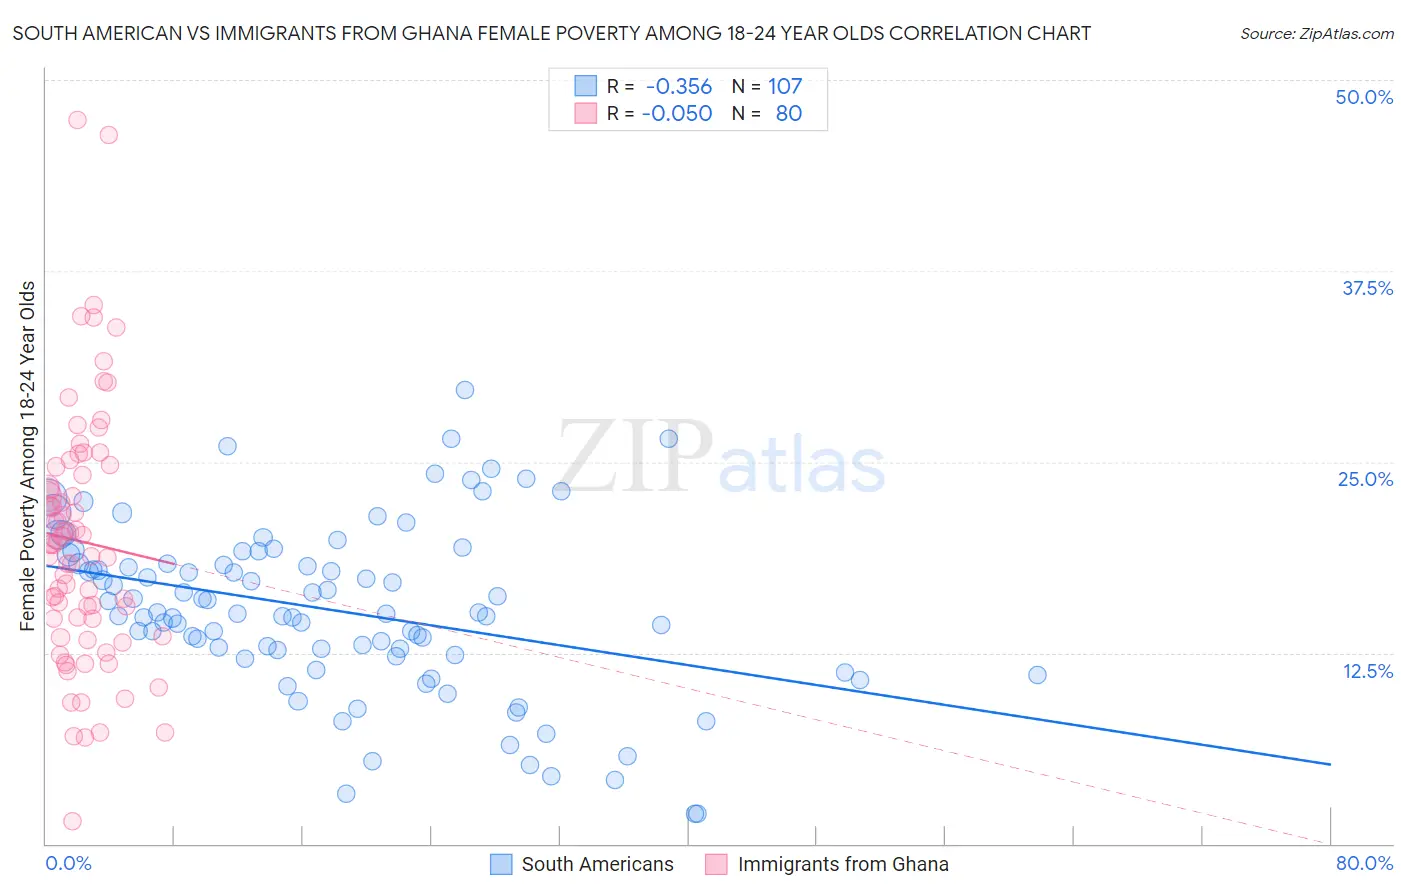 South American vs Immigrants from Ghana Female Poverty Among 18-24 Year Olds